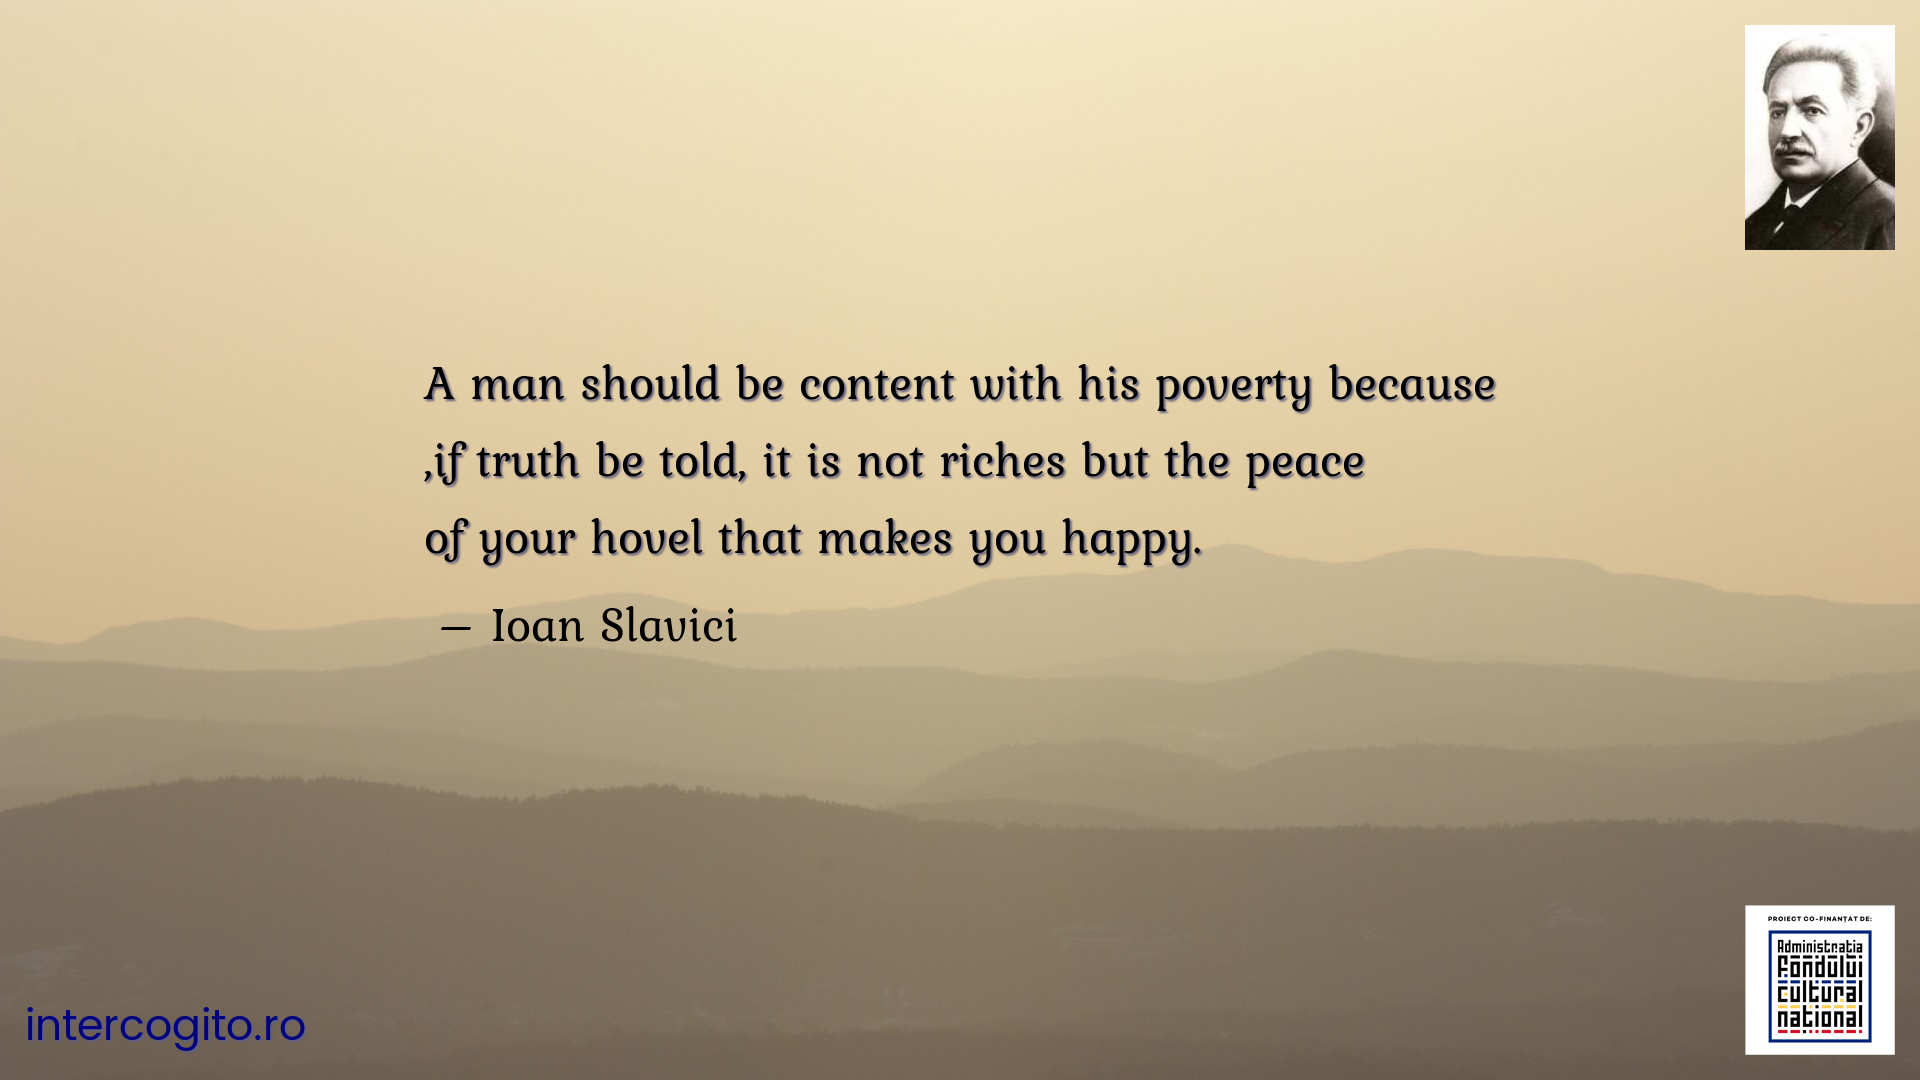 A man should be content with his poverty because ,if truth be told, it is not riches but the peace of your hovel that makes you happy.